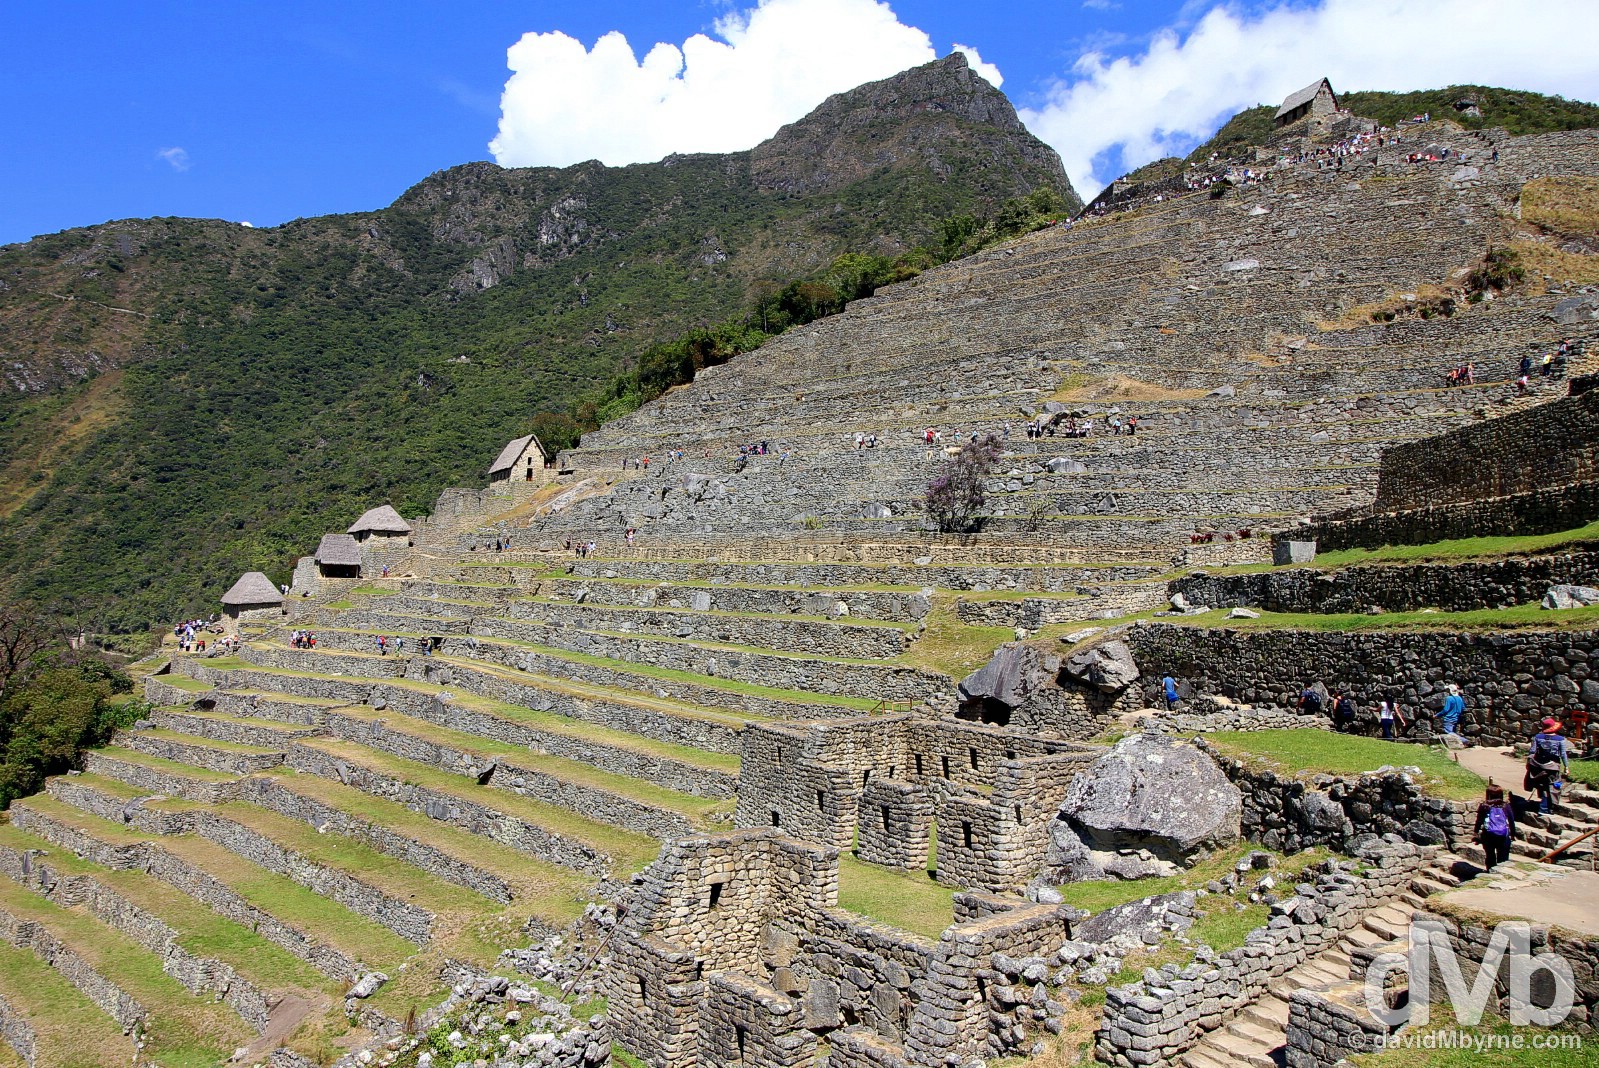 The terraces of the Eastern Agricultural Sector in Machu Picchu, Peru. August 15, 2015. 